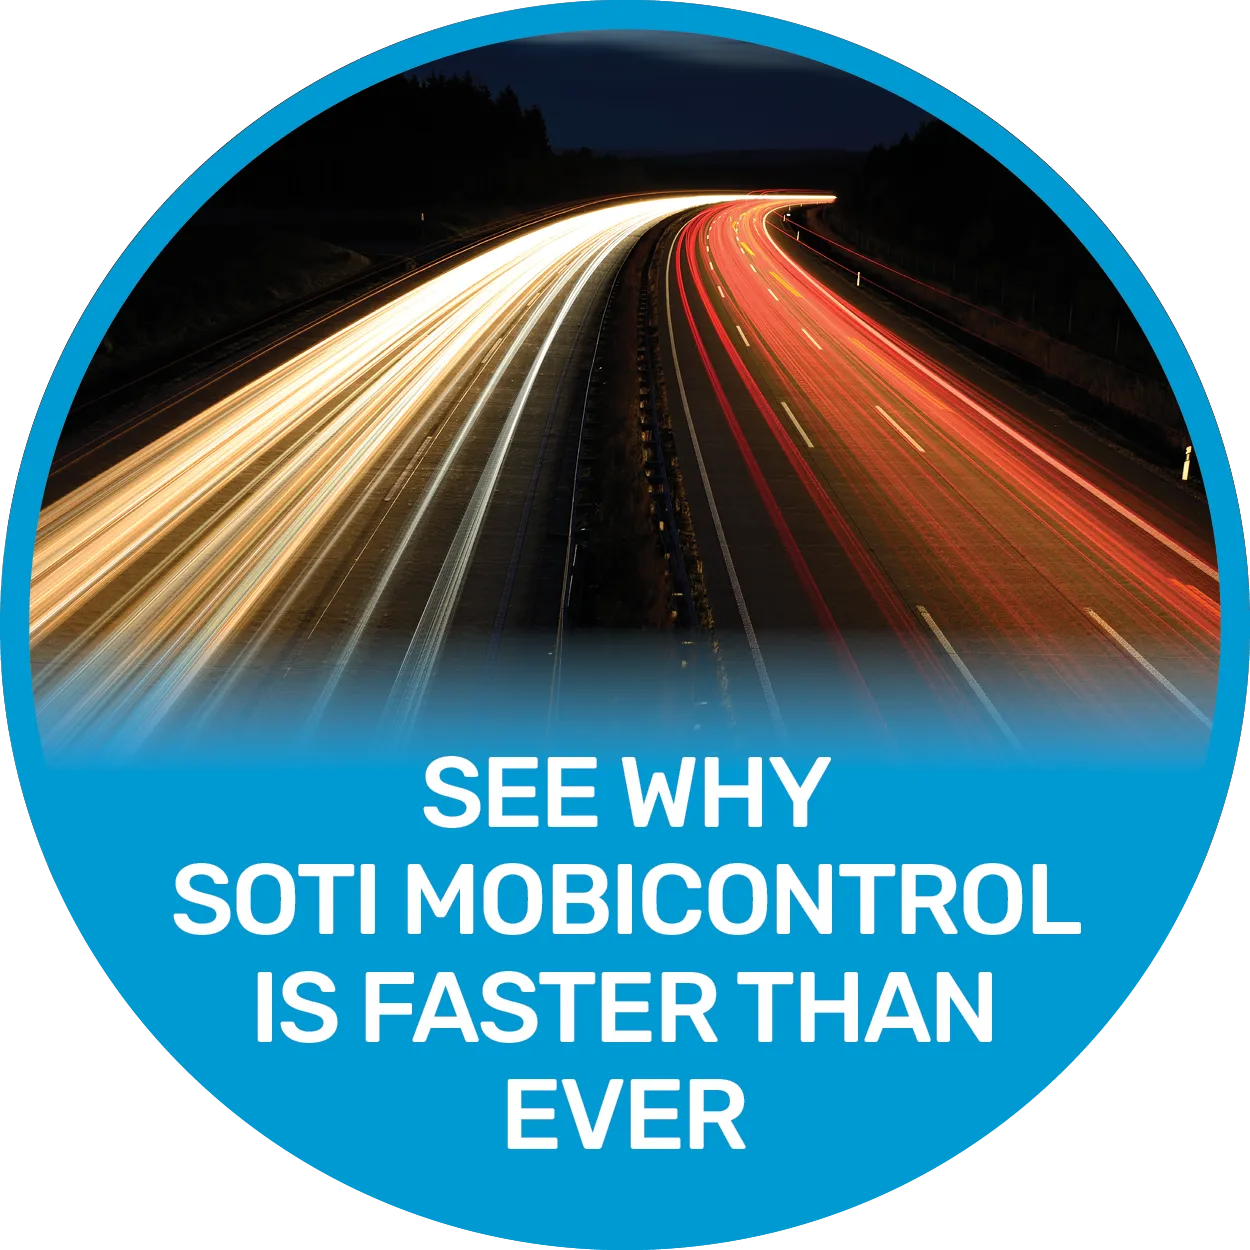 See why SOTI Mobicontrol is faster than ever